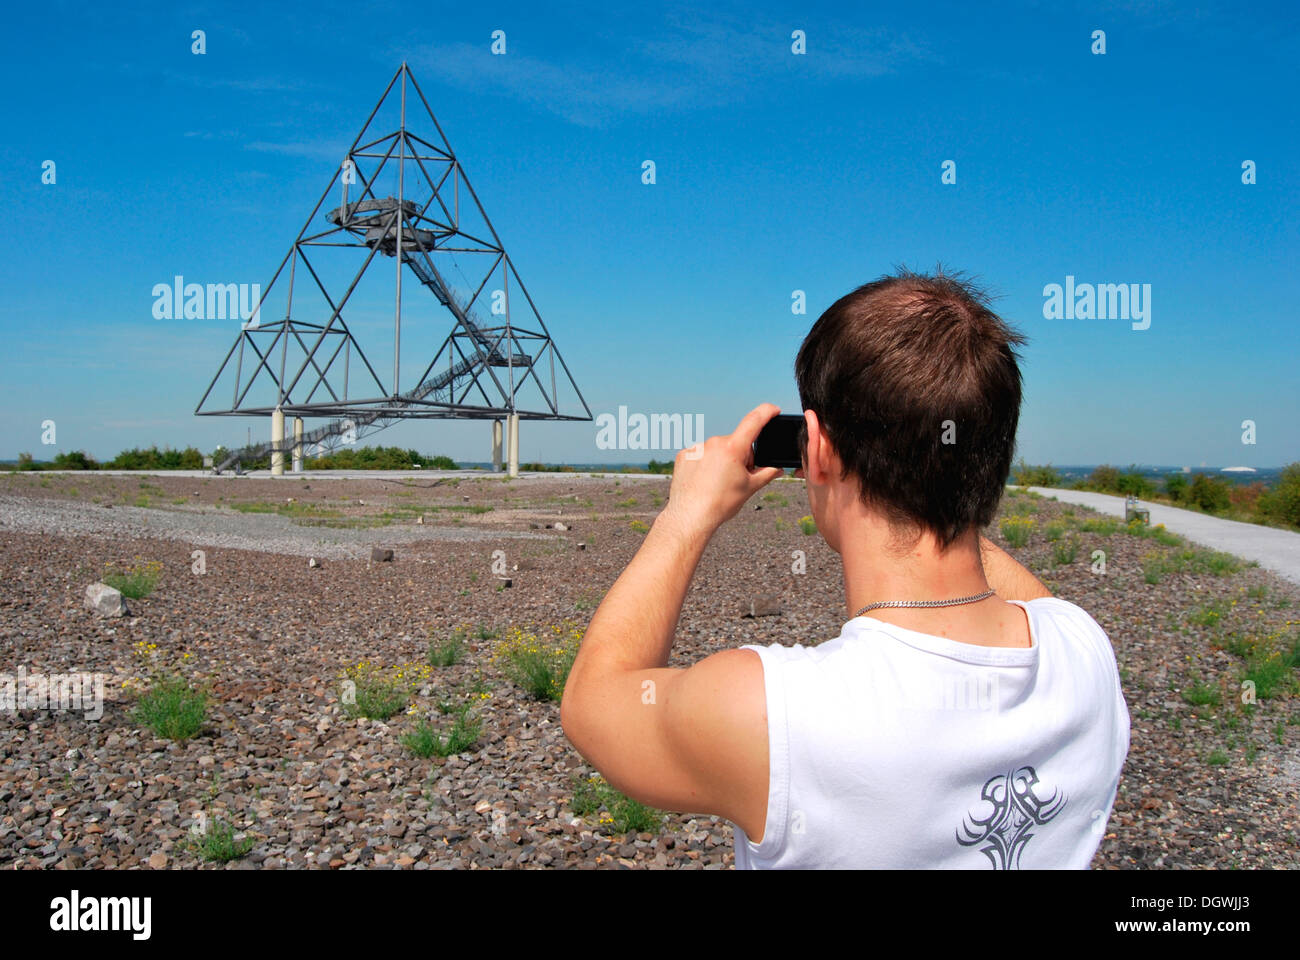 Young man taking pictures of the Tetraeder landmark, a tetrahedron made from steel, with a digital camera, industrial heritage Stock Photo